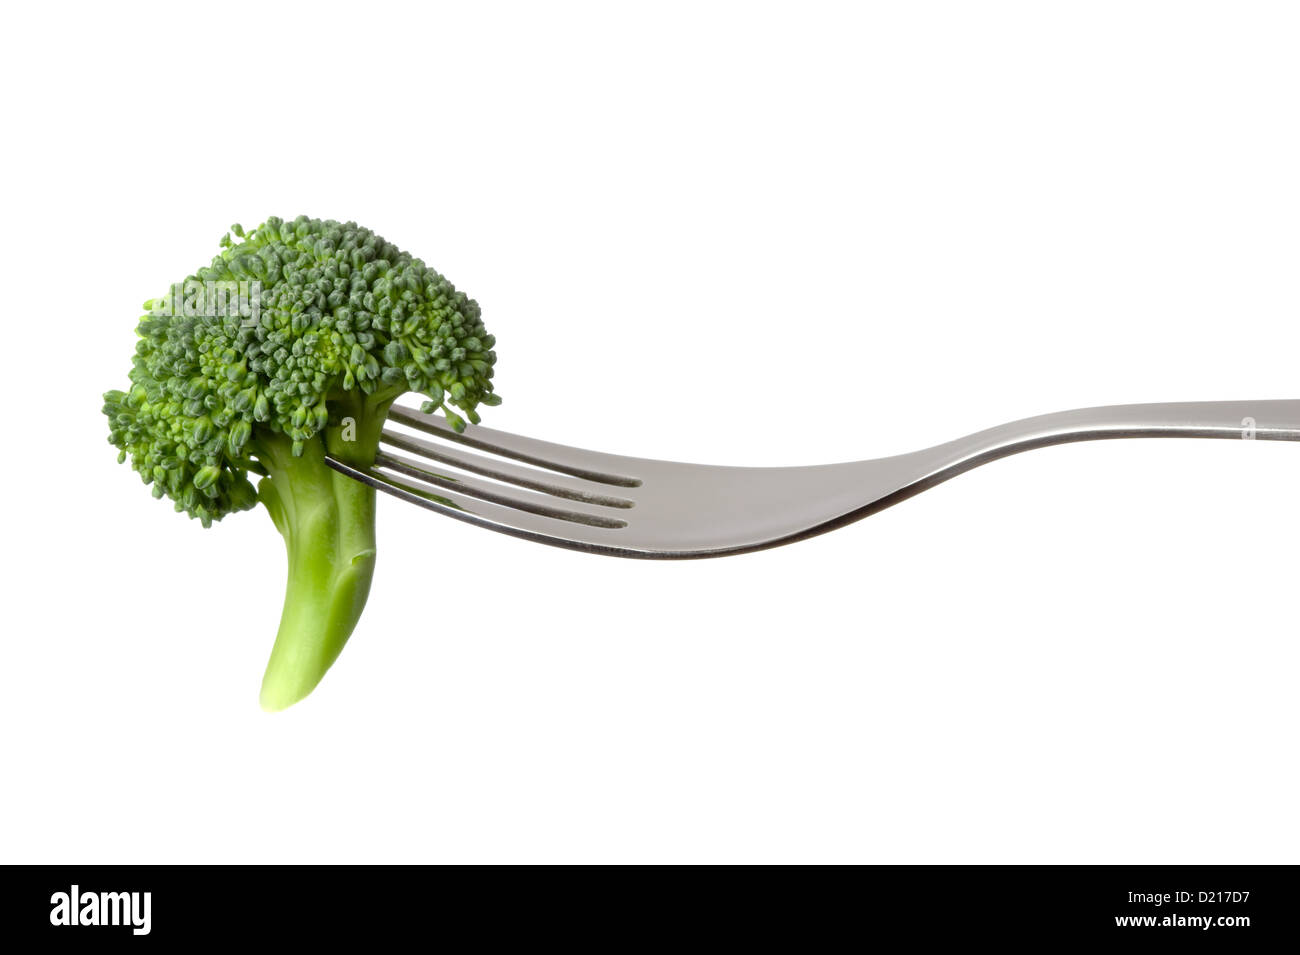 broccoli floret on a fork isolated against white background Stock Photo